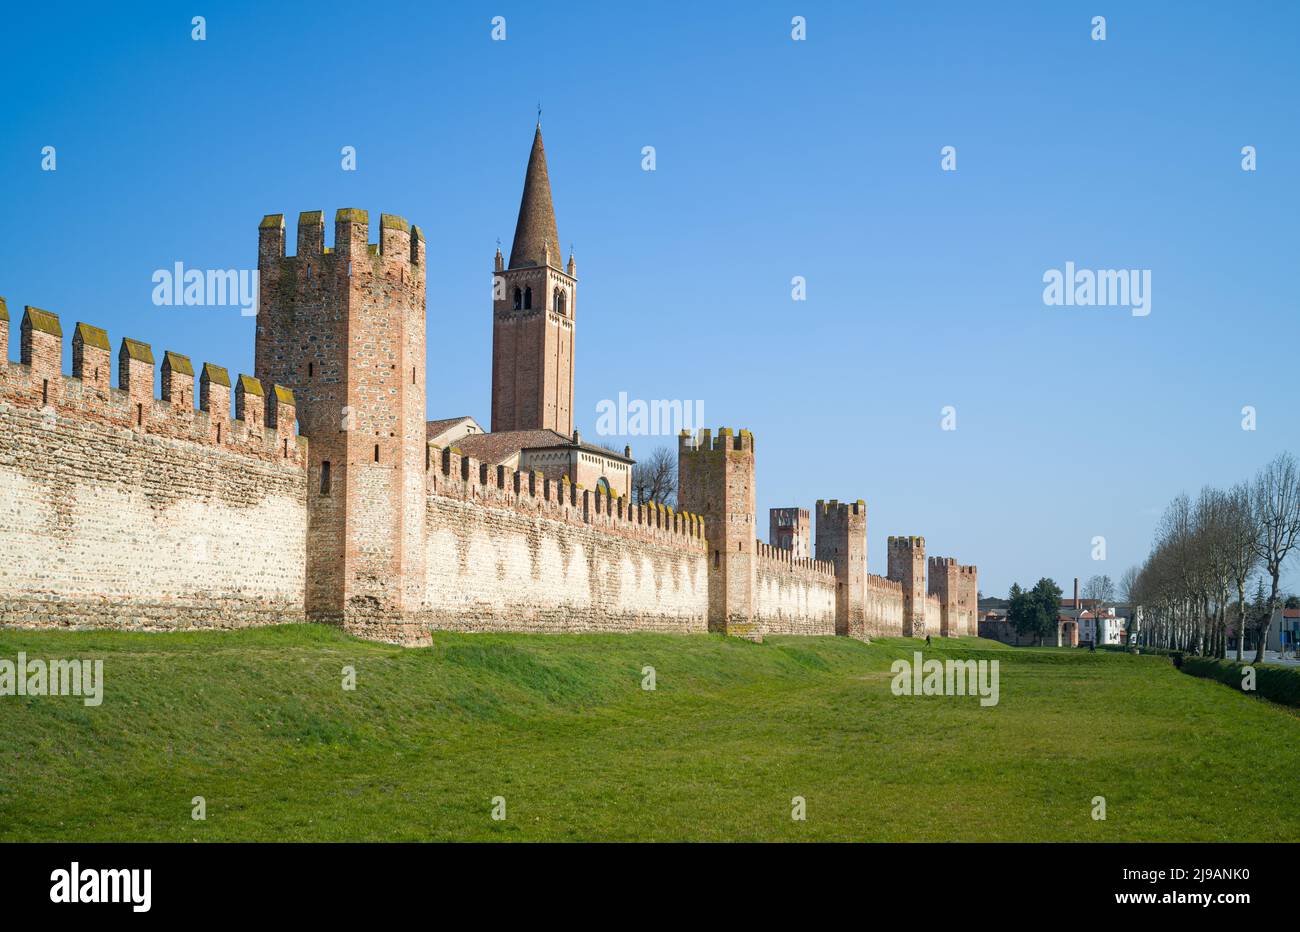 Italy, Montagnana,the medieval walls that surround the town with the bell tower of the San Francesco church Stock Photo